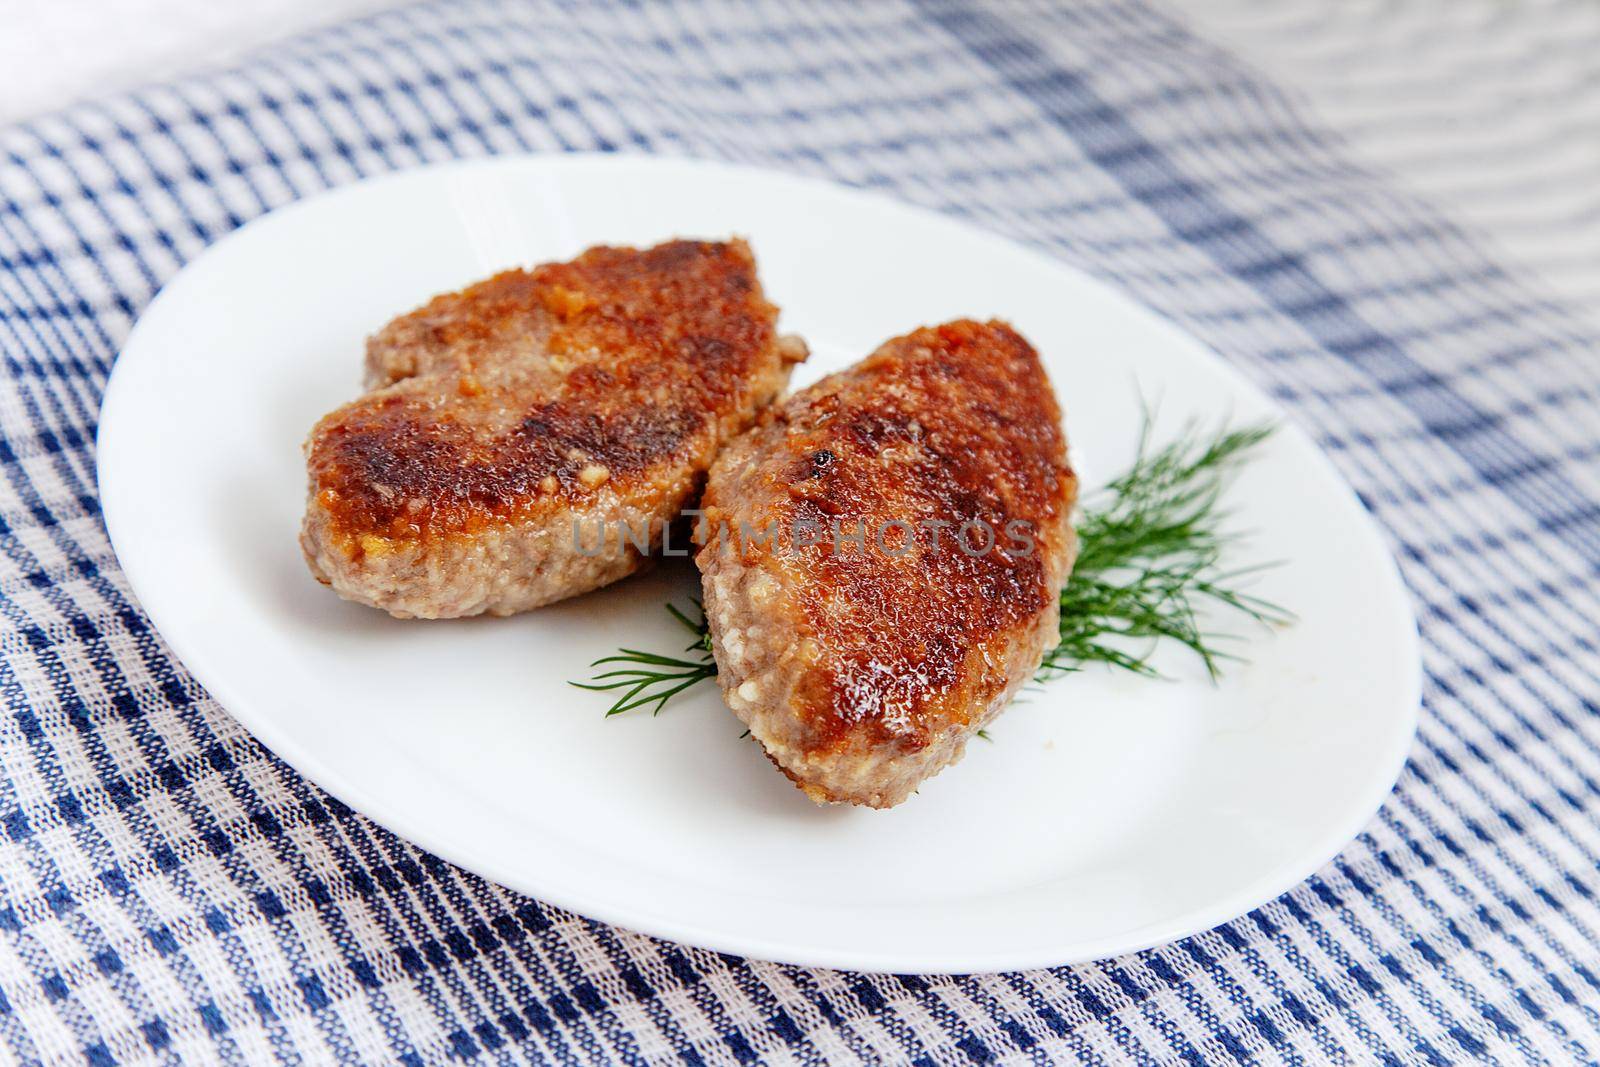 Delicious fryied meat russian cuisine dish